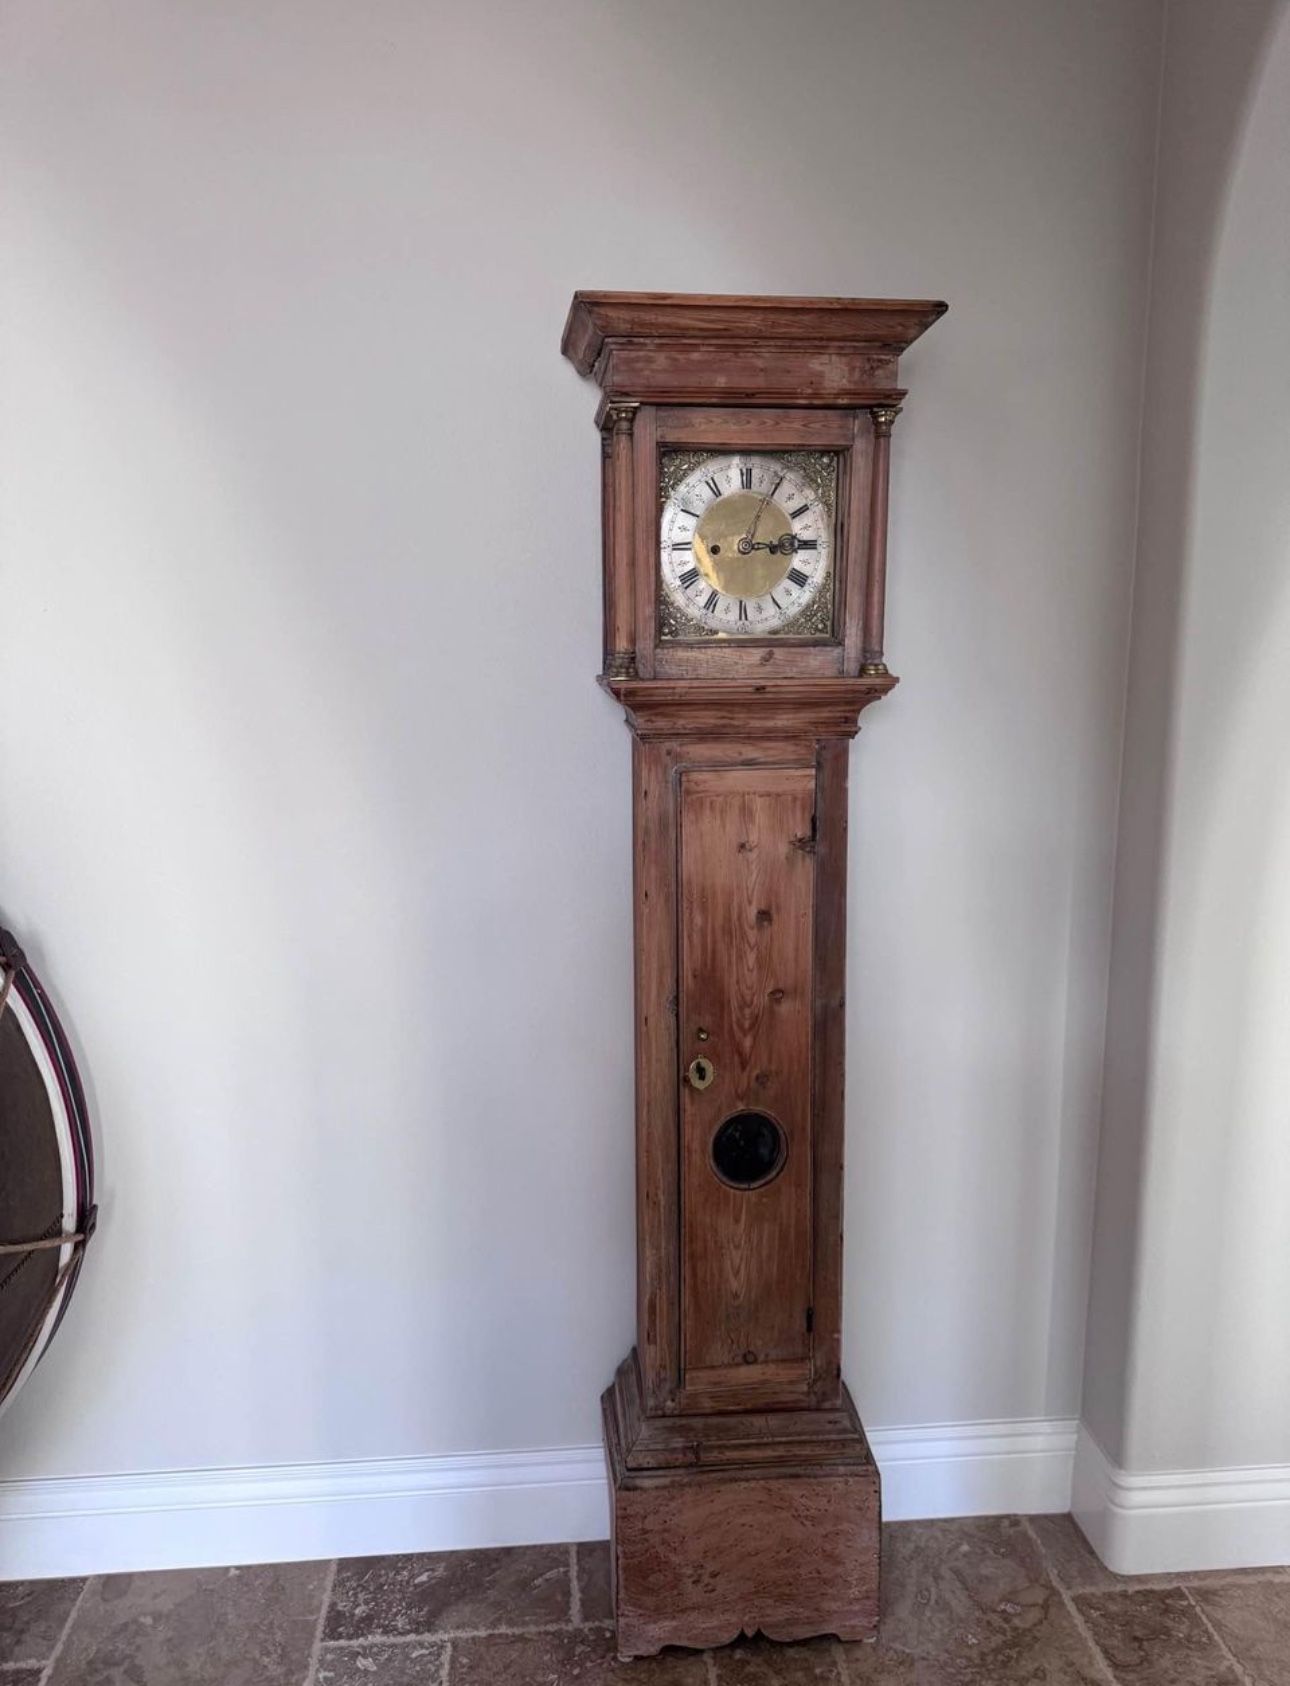 Antique Grandfather Clock From England, Made In 1745